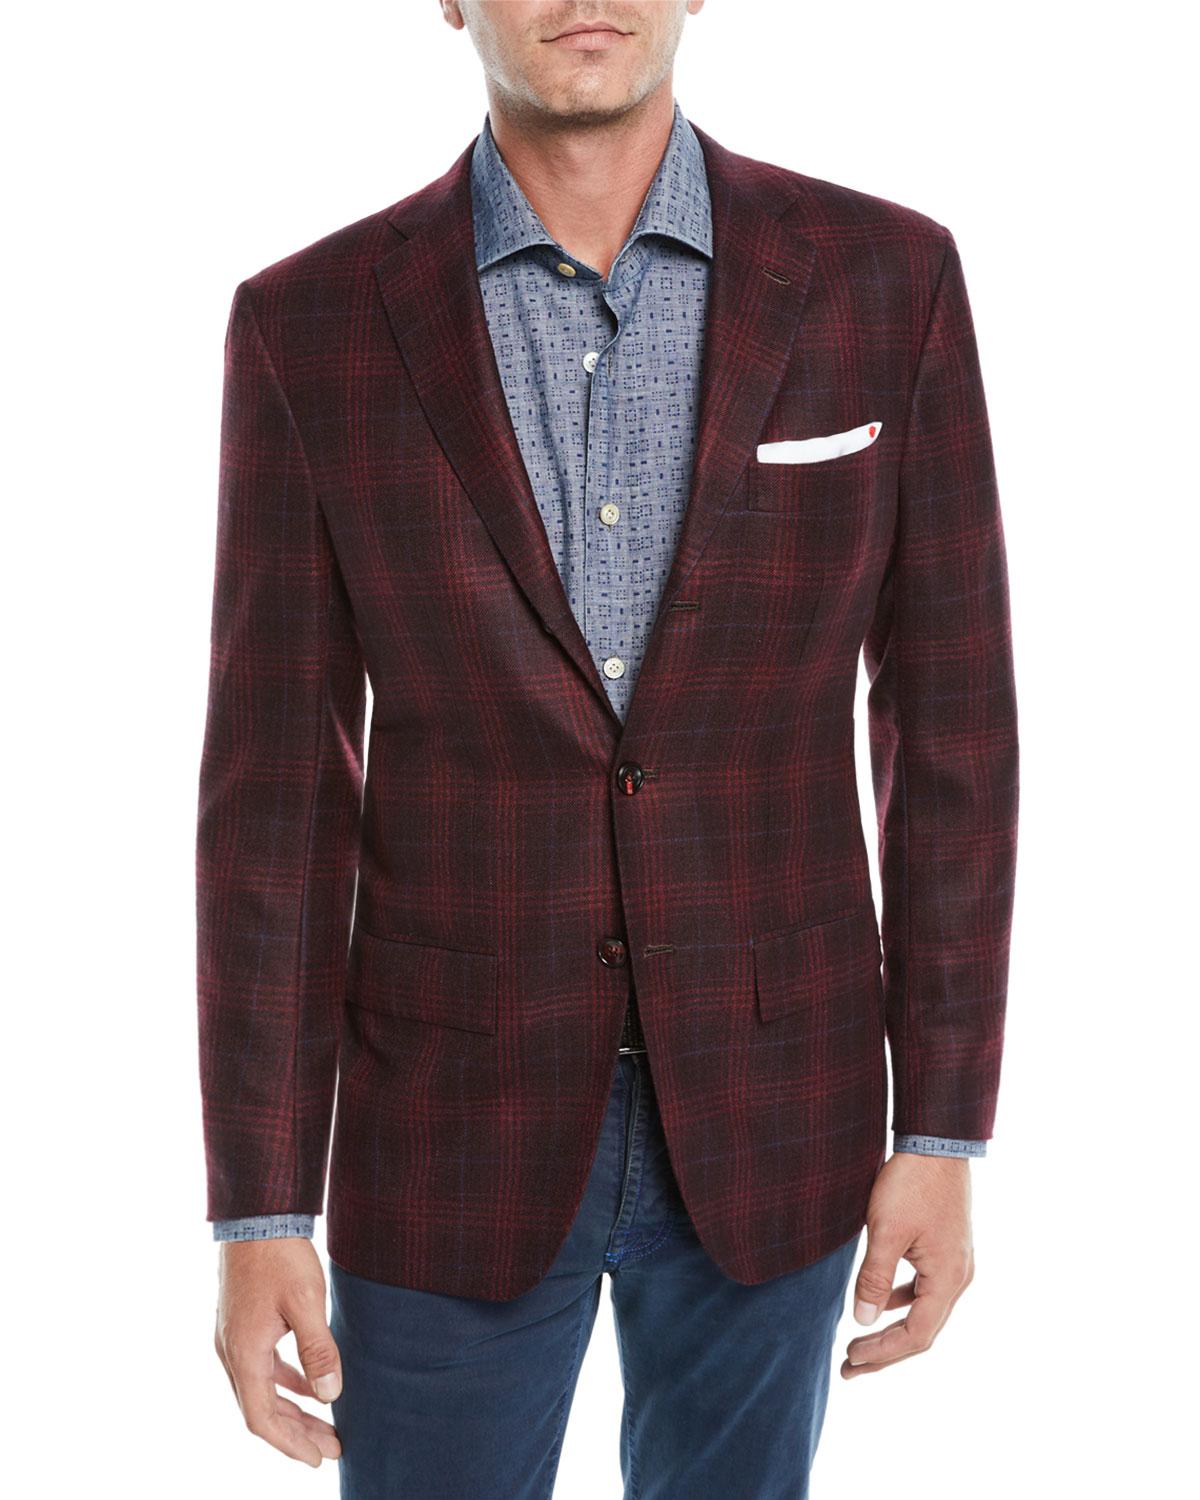 Kiton Men's Plaid Cashmere 3-button Sport Coat Jacket in Red for Men - Lyst